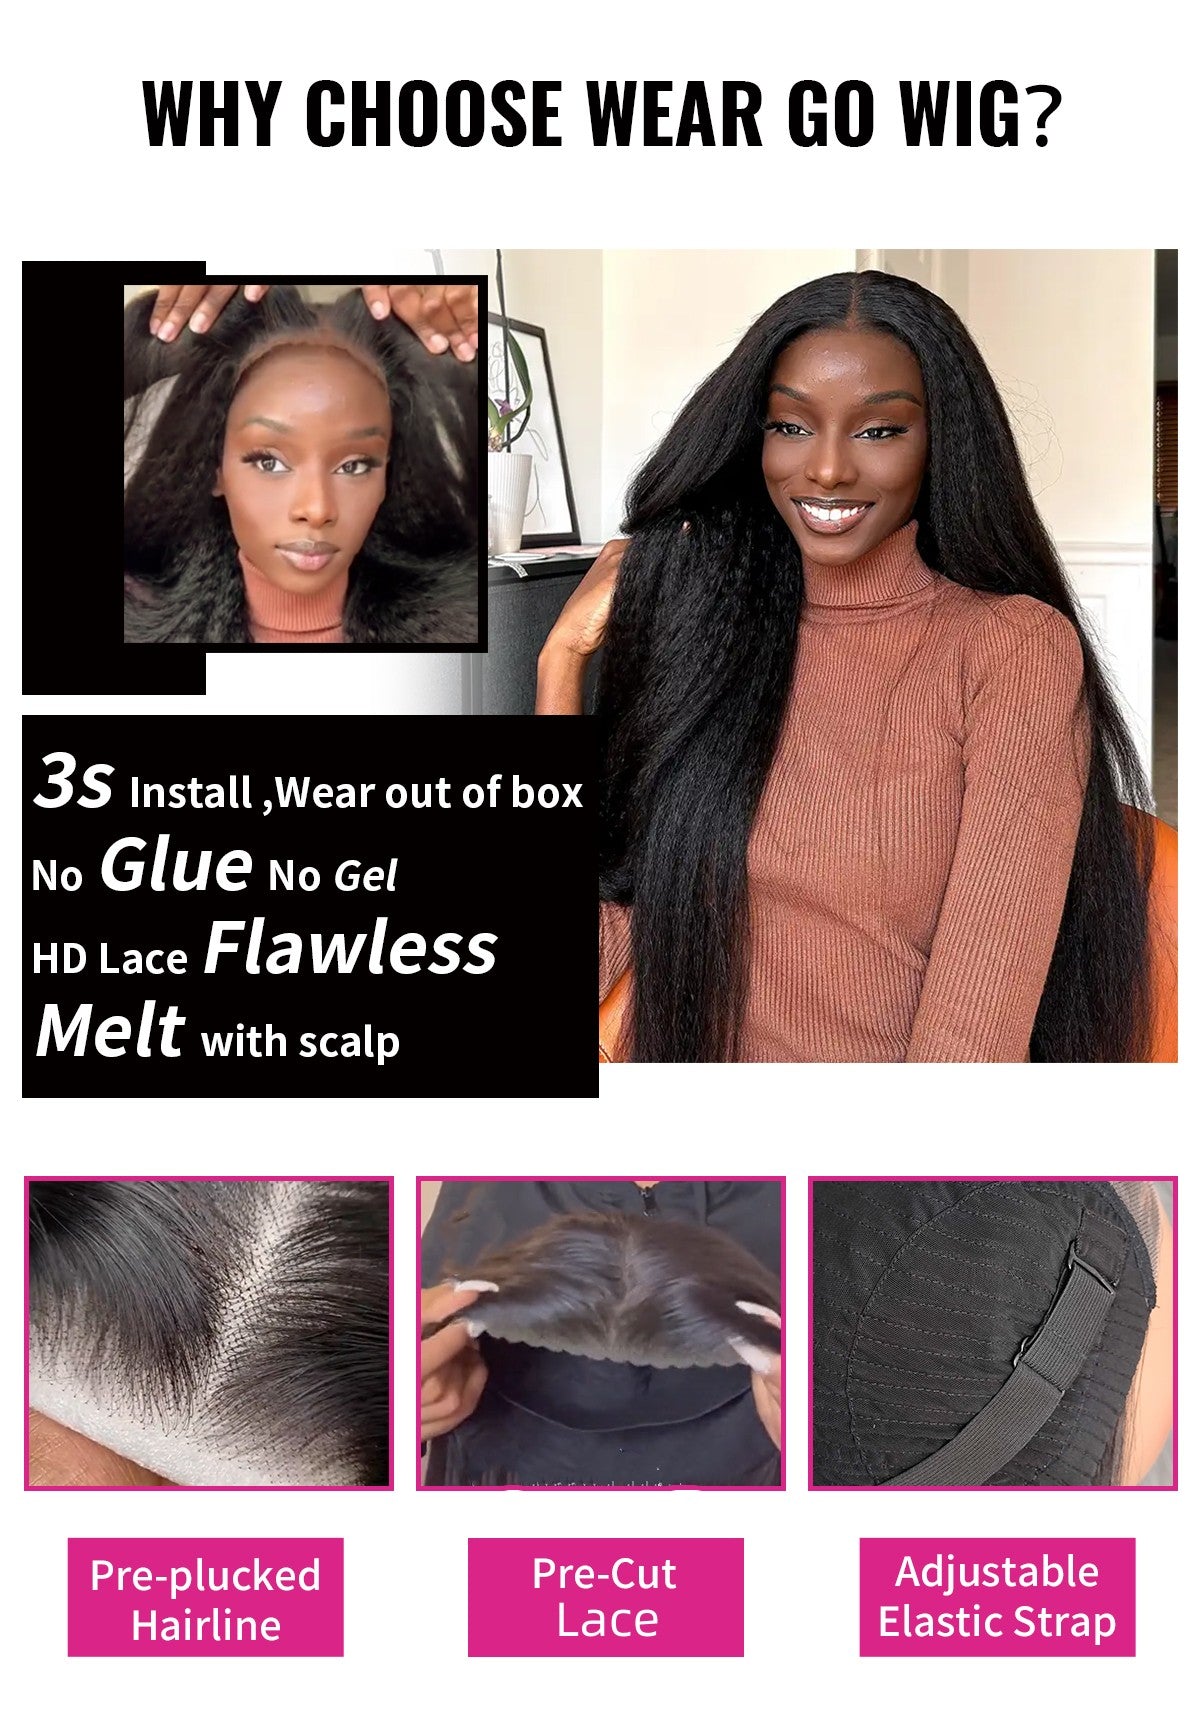 How to Properly Secure and Adjust a Pre-Cut Lace Wigs for a